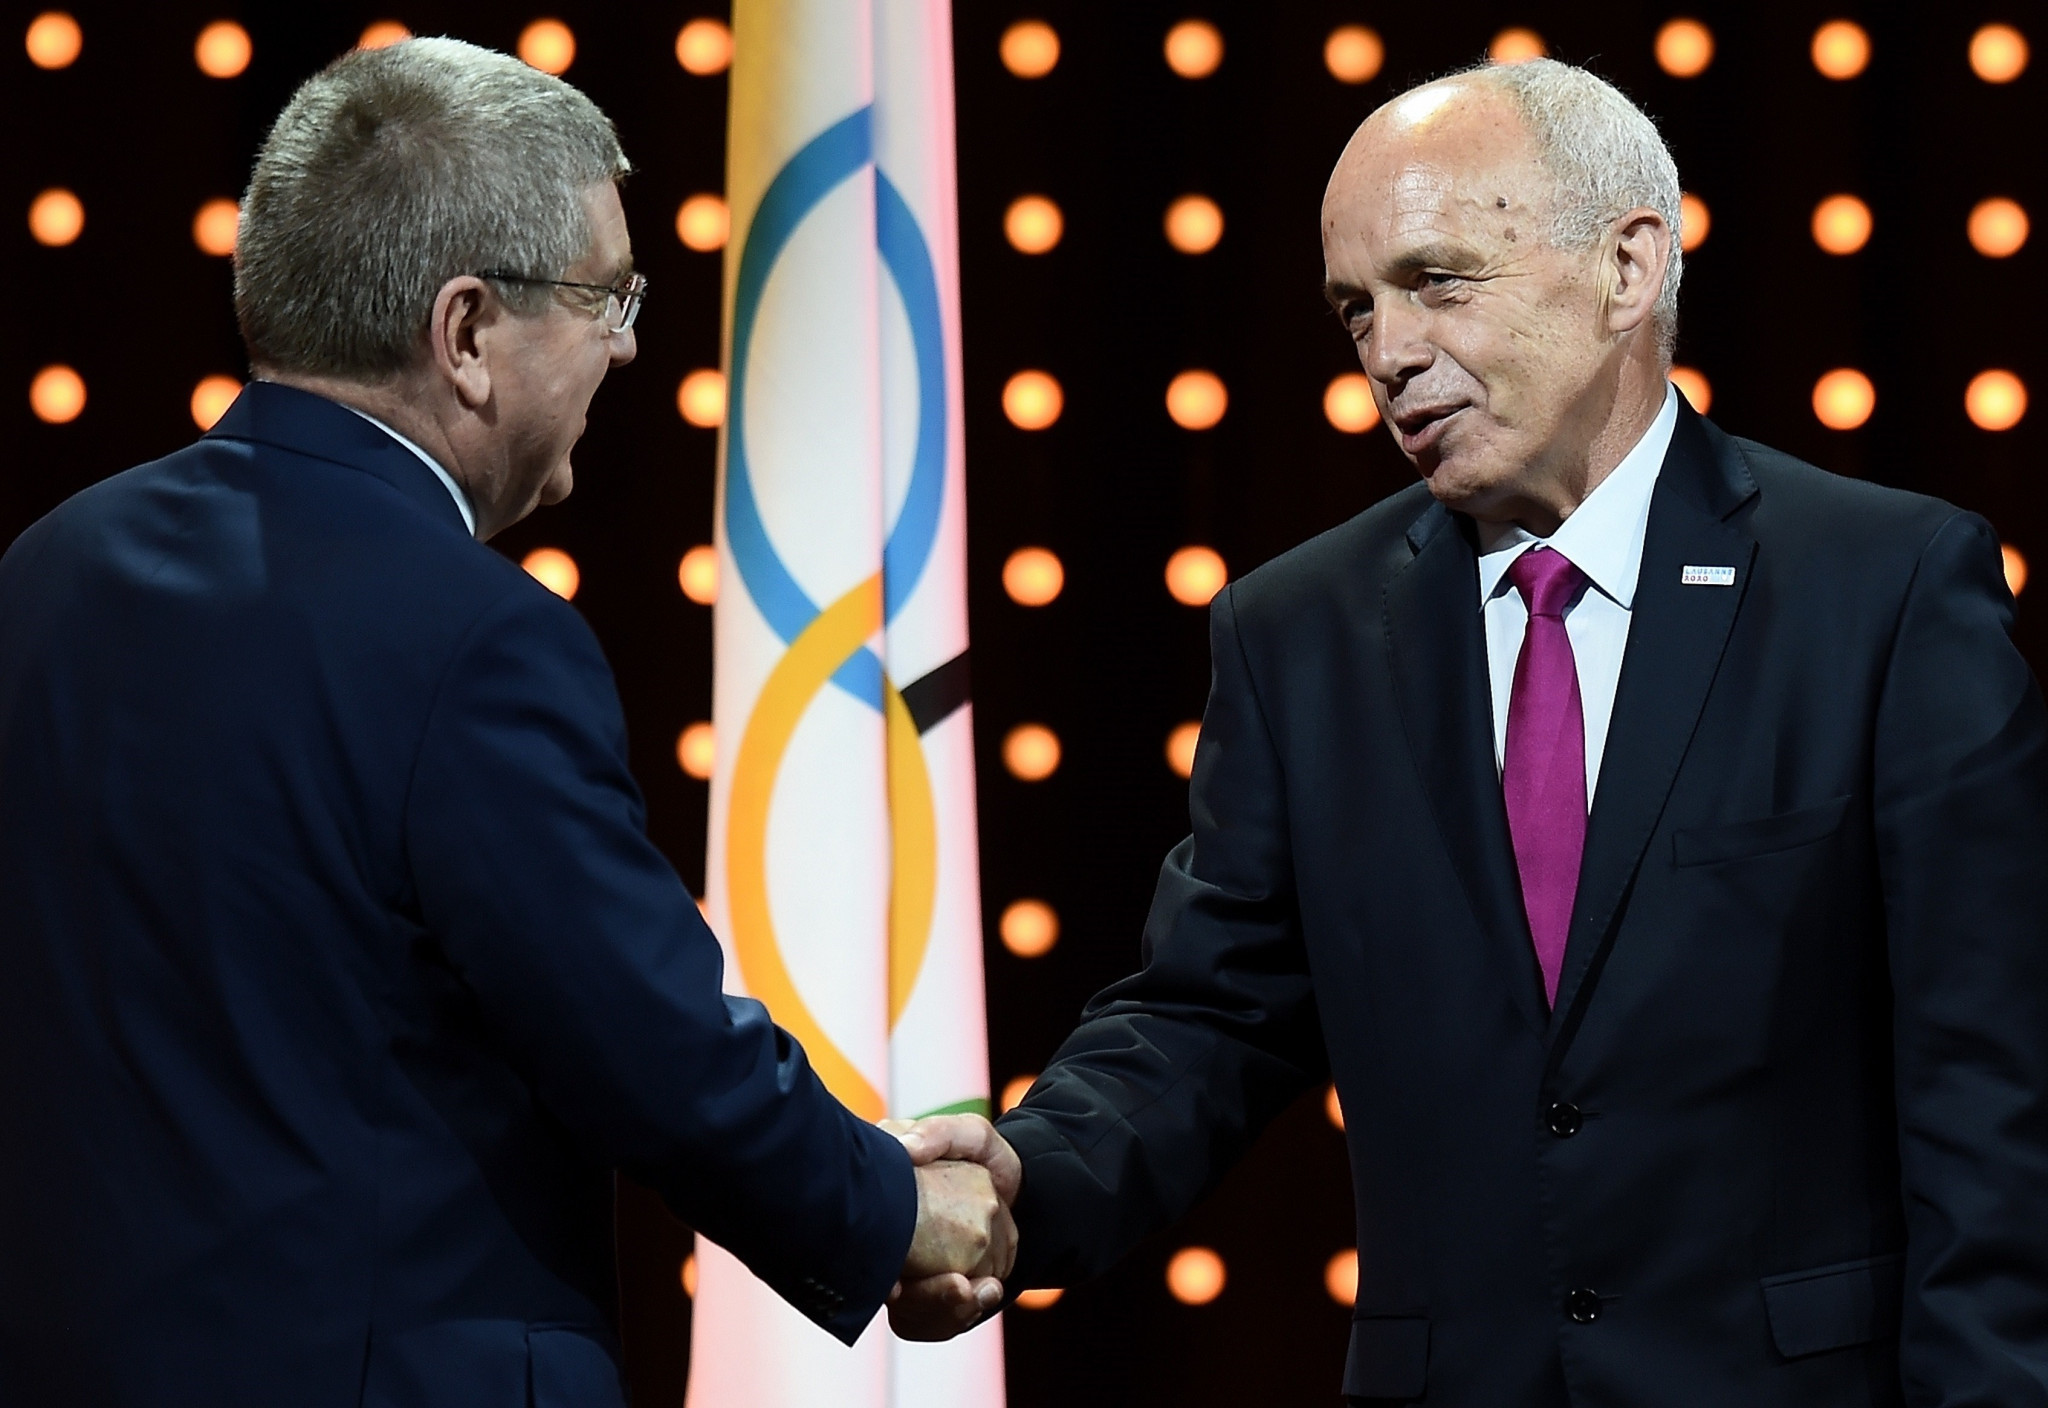 Ueli Maurer, right, supported Lausanne's successful bid for the 2020 Winter Youth Olympics ©Getty Images